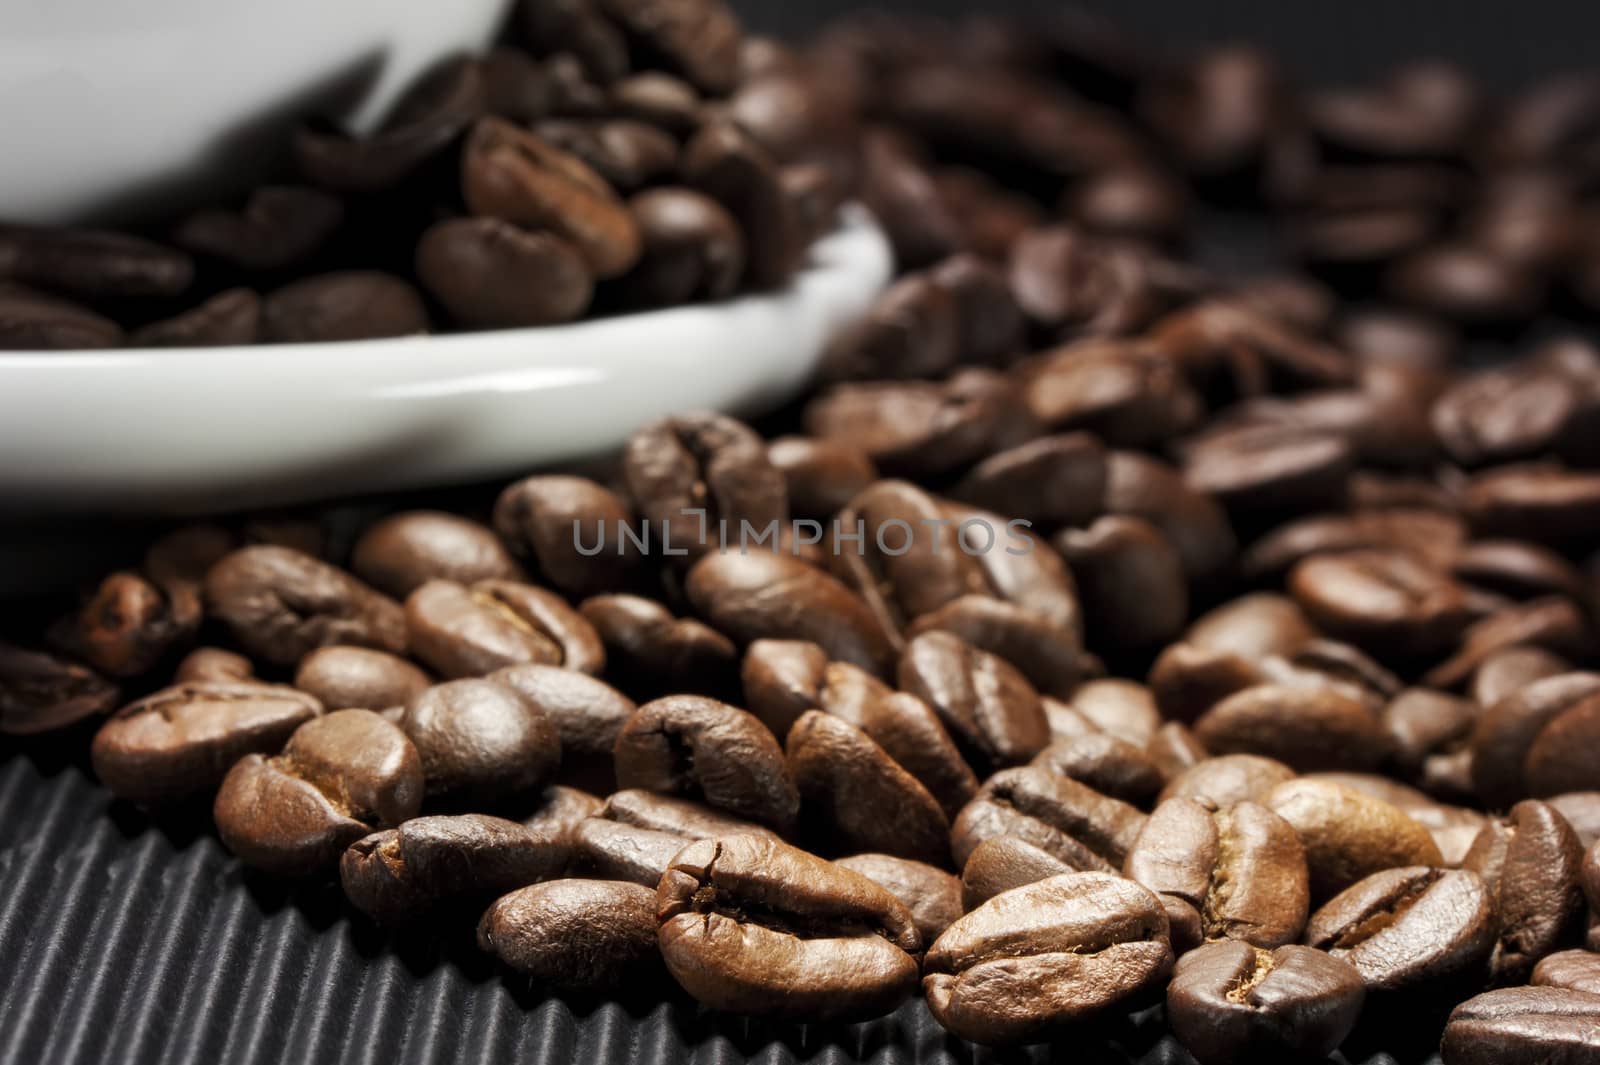 Coffee beans scattered on a black grooved